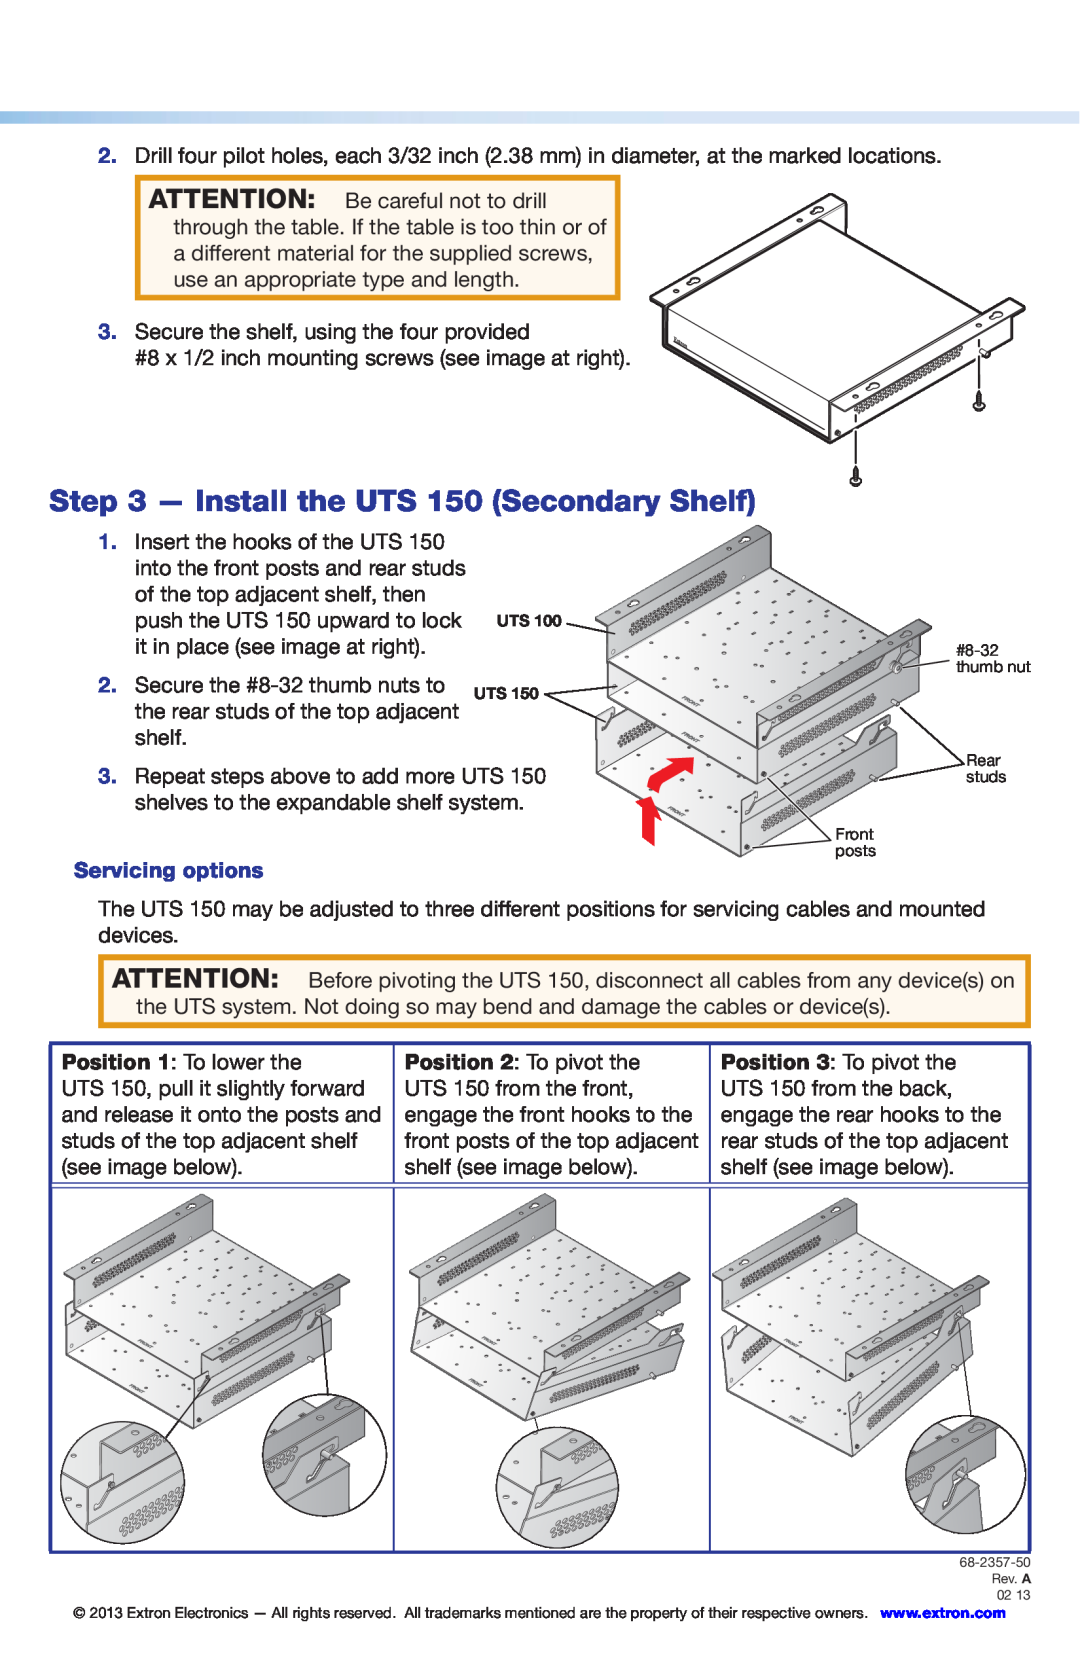 Extron electronic 100 setup guide Install the UTS 150 Secondary Shelf, Servicing options 